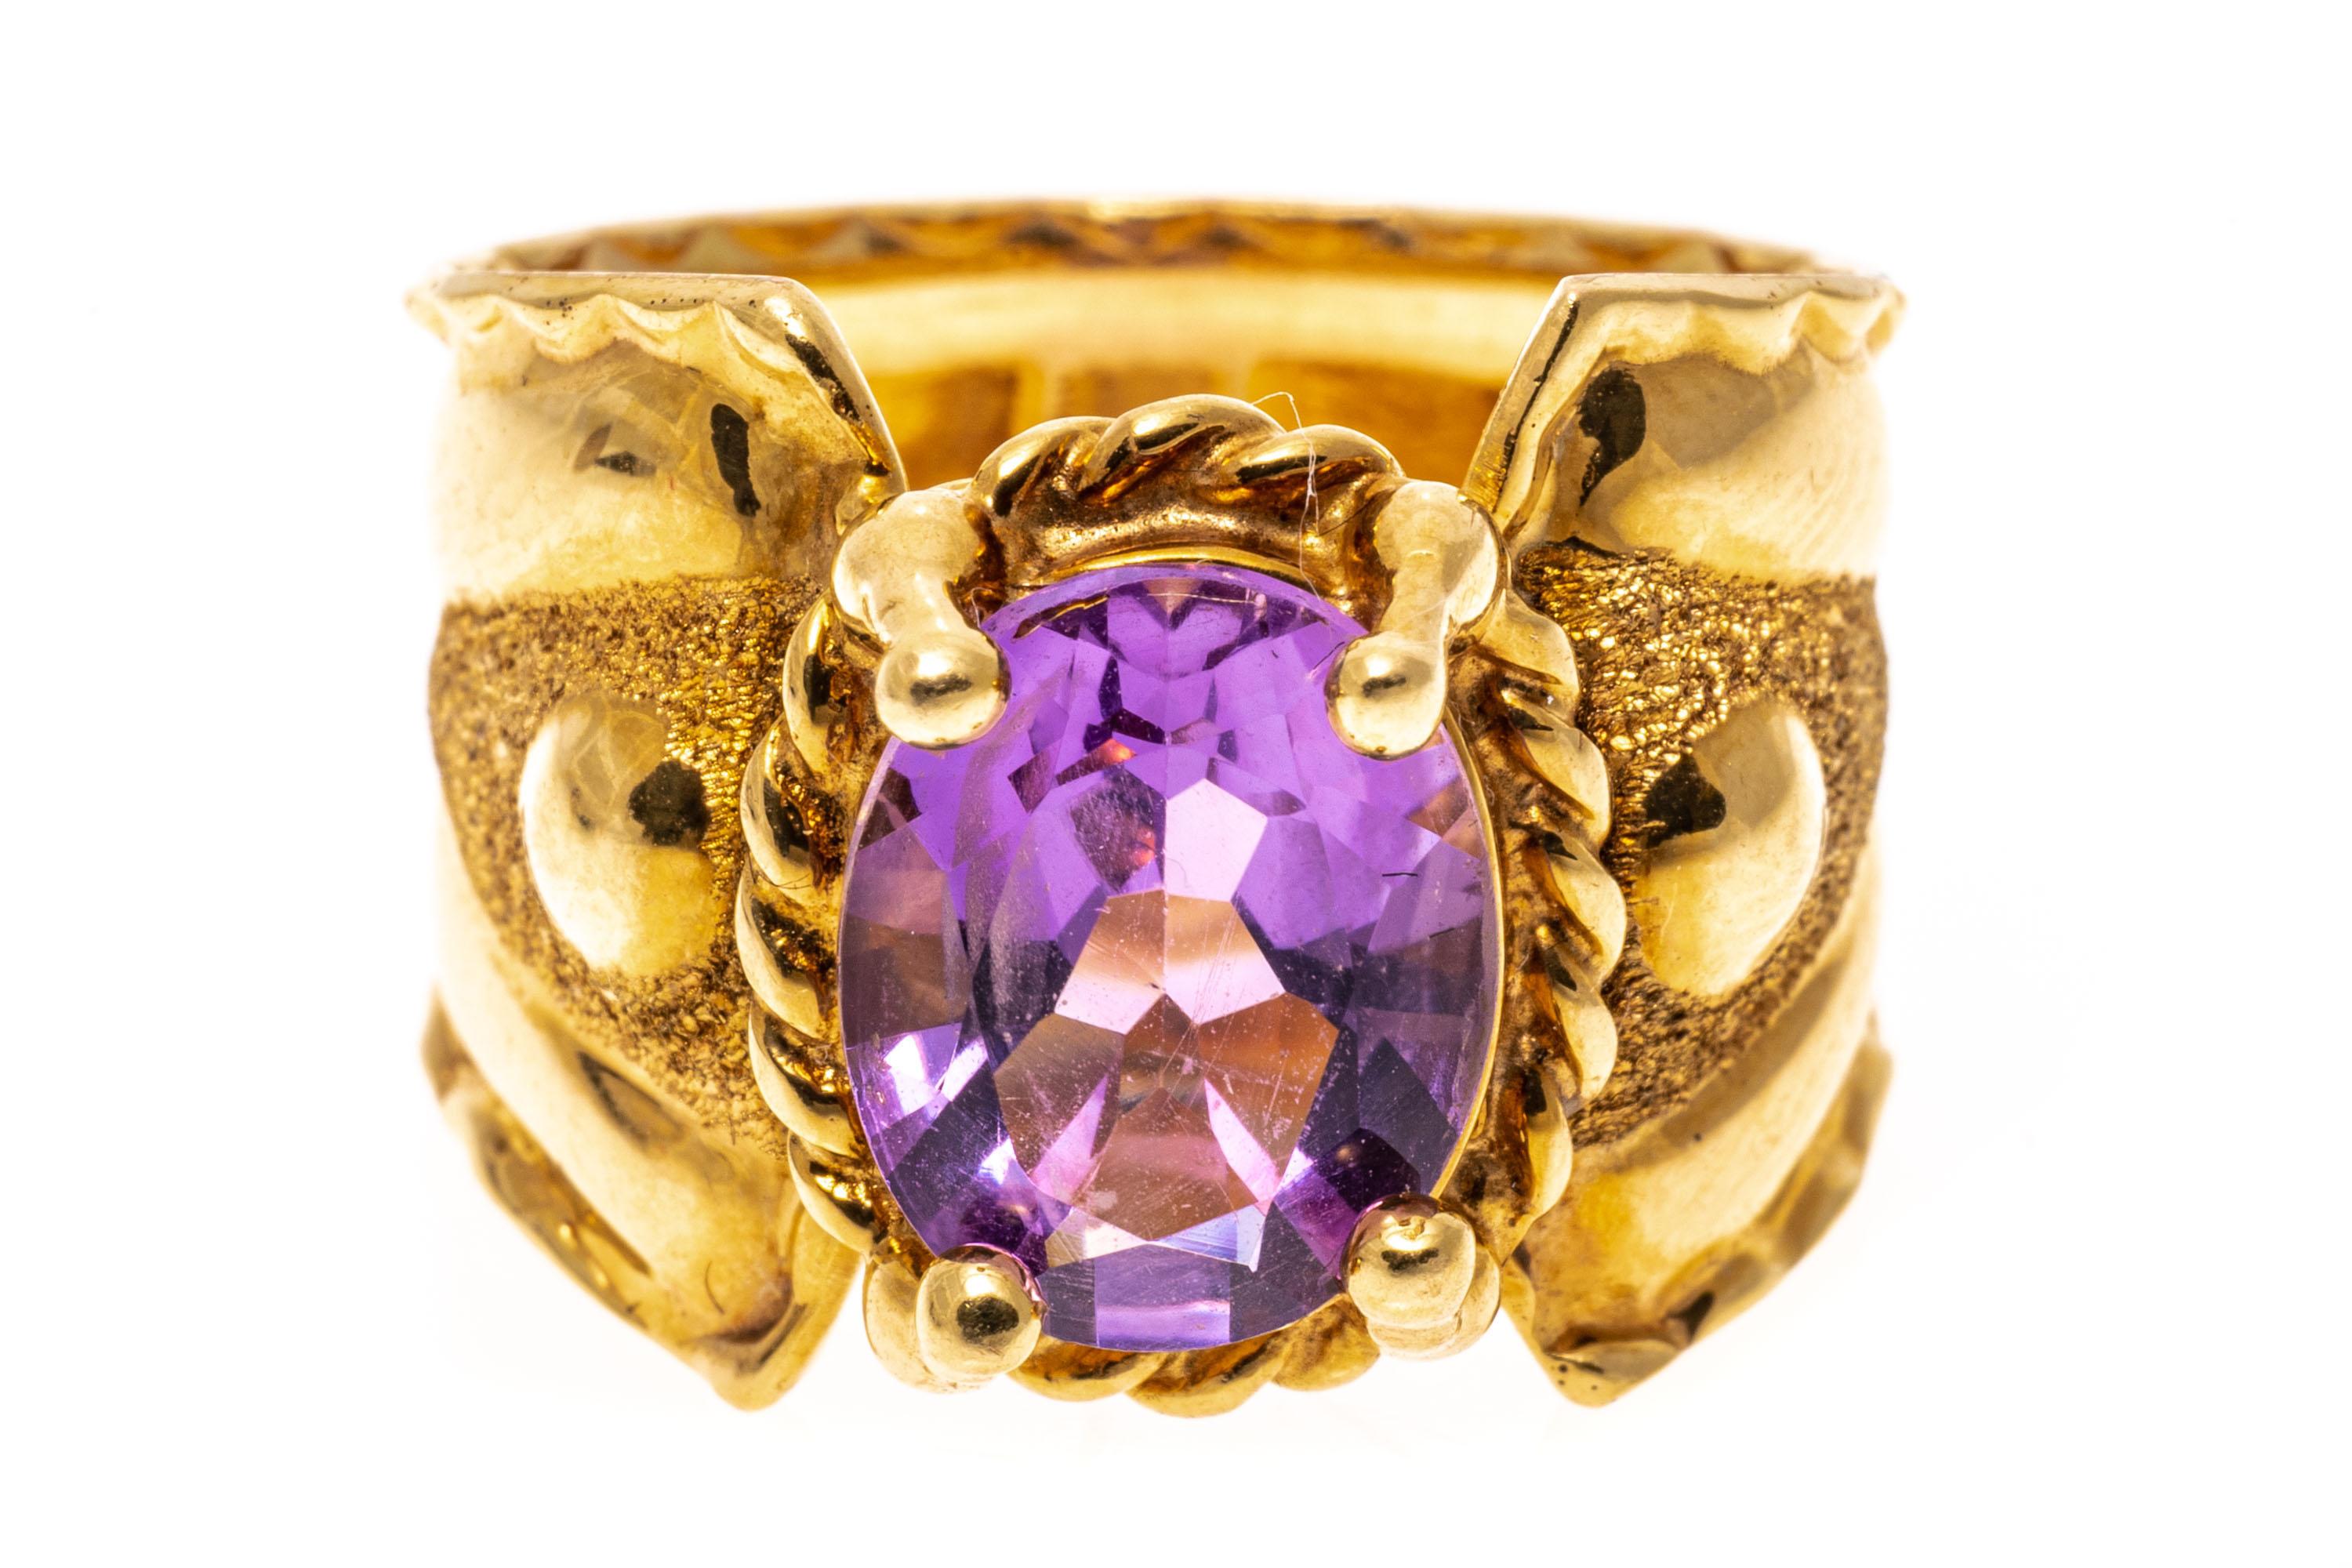 14k yellow gold ring. This striking ring is an ultra wide, tapered band, set with a center oval faceted, light purple color amethyst, approximately 2.06 CTS, prong set and trimmed with a rope edged border. The ring is finished by a sandblast